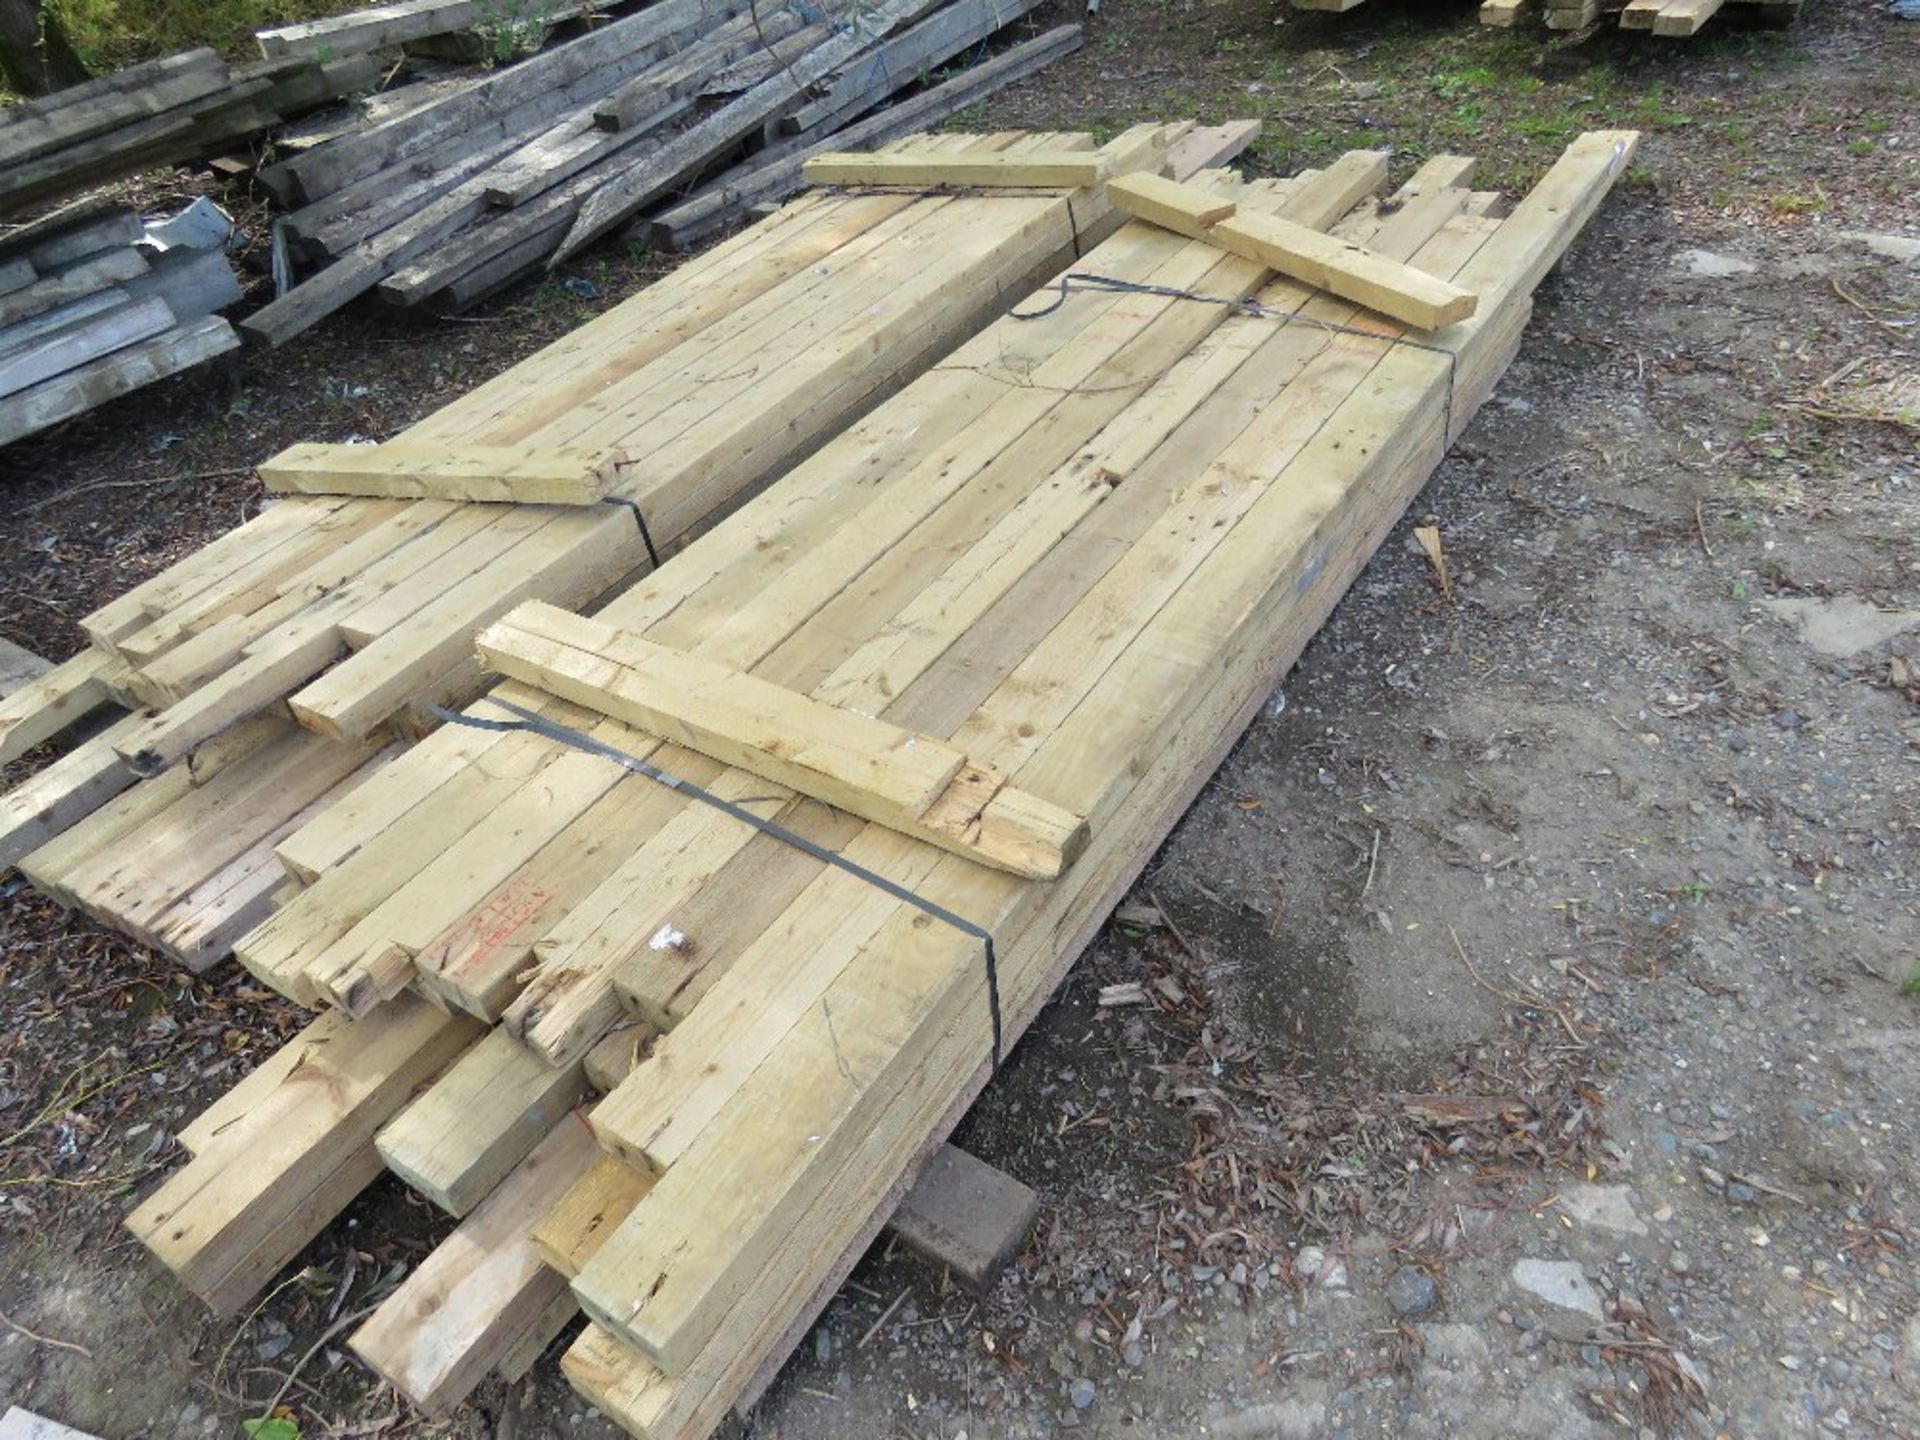 2 X BUNDLES OF PRE USED DE-NAILED 4X2 TIMBER. MAJORITY BEING 2.4-3M LENGTH APPROX. 32 PIECES IN EACH - Image 2 of 3